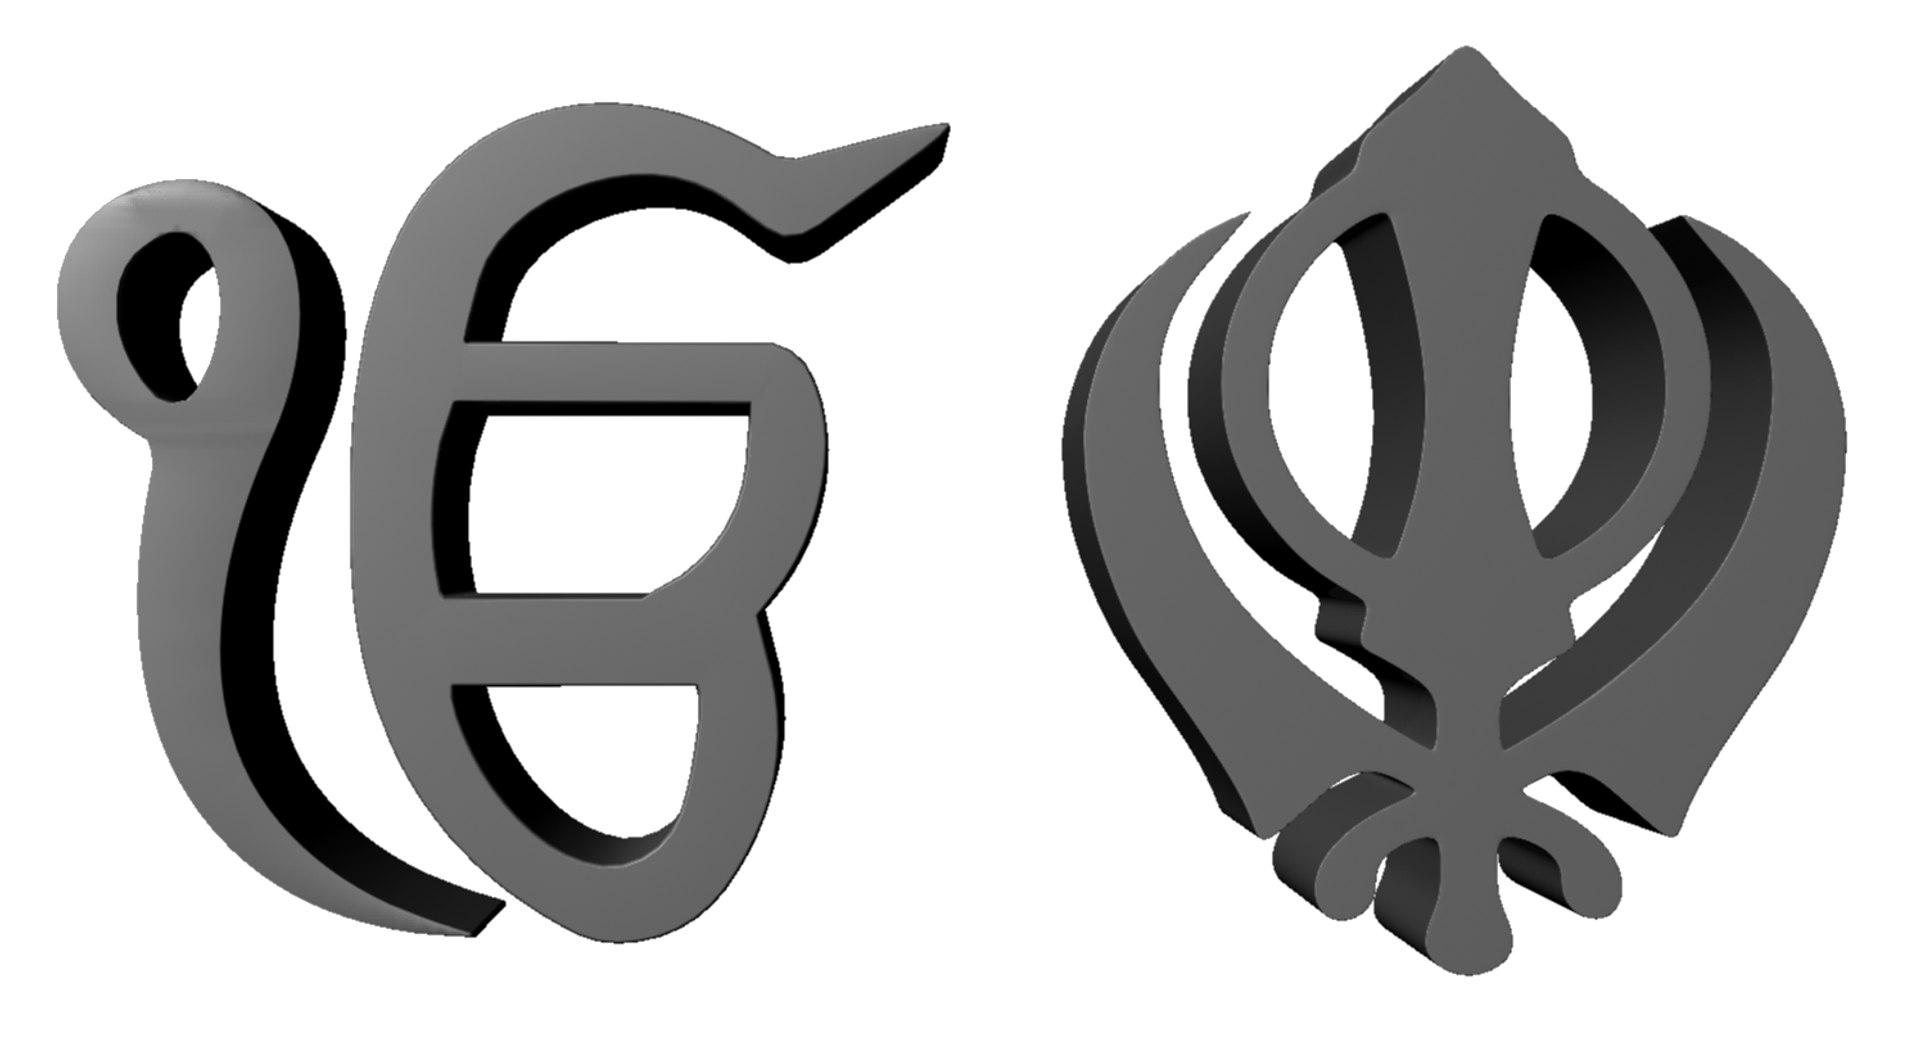 Ek e k logo made of small letters with black Vector Image